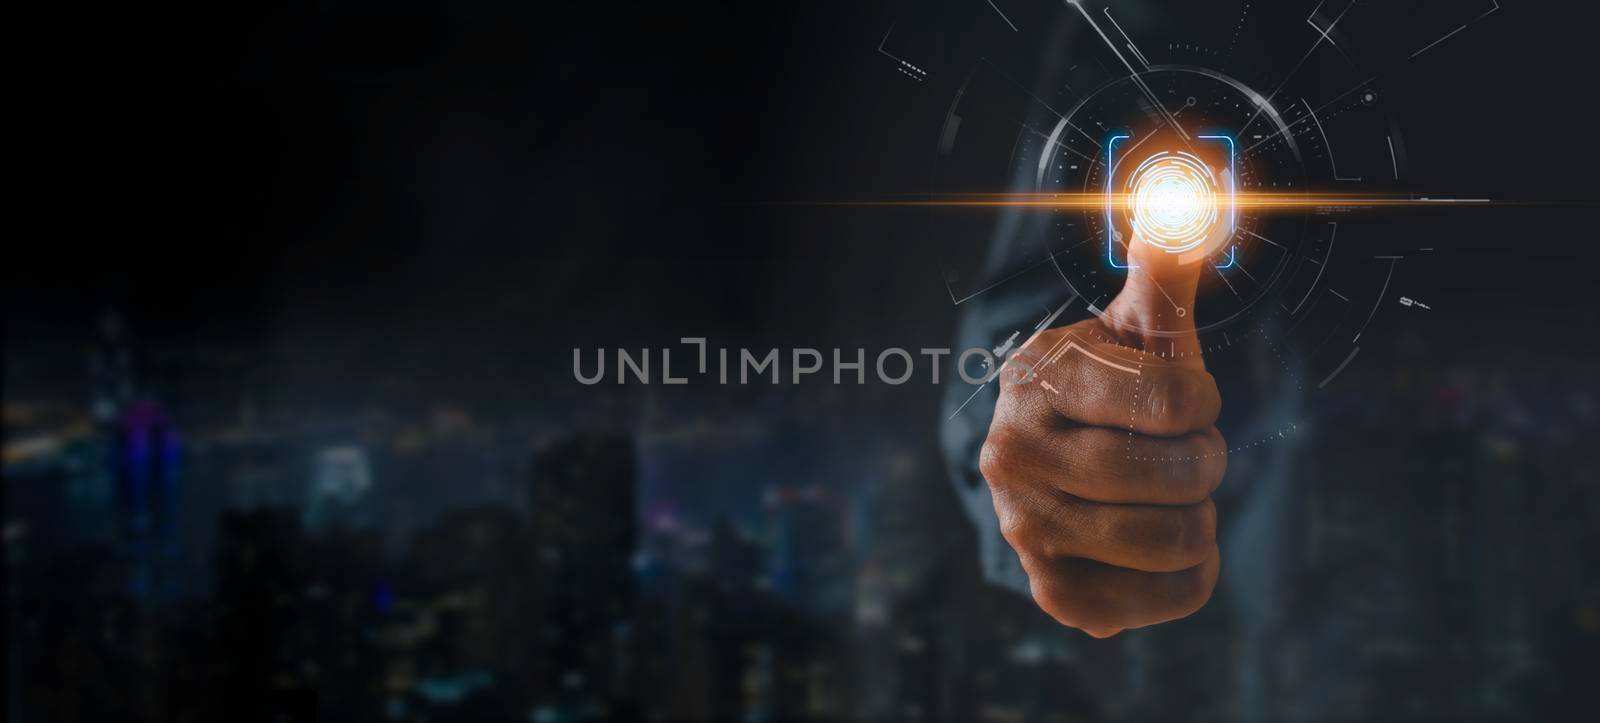 Businessman hand using fingerprint identification to access personal financial data, Fingerprint scan provides security access with biometrics identification. Business technology concept